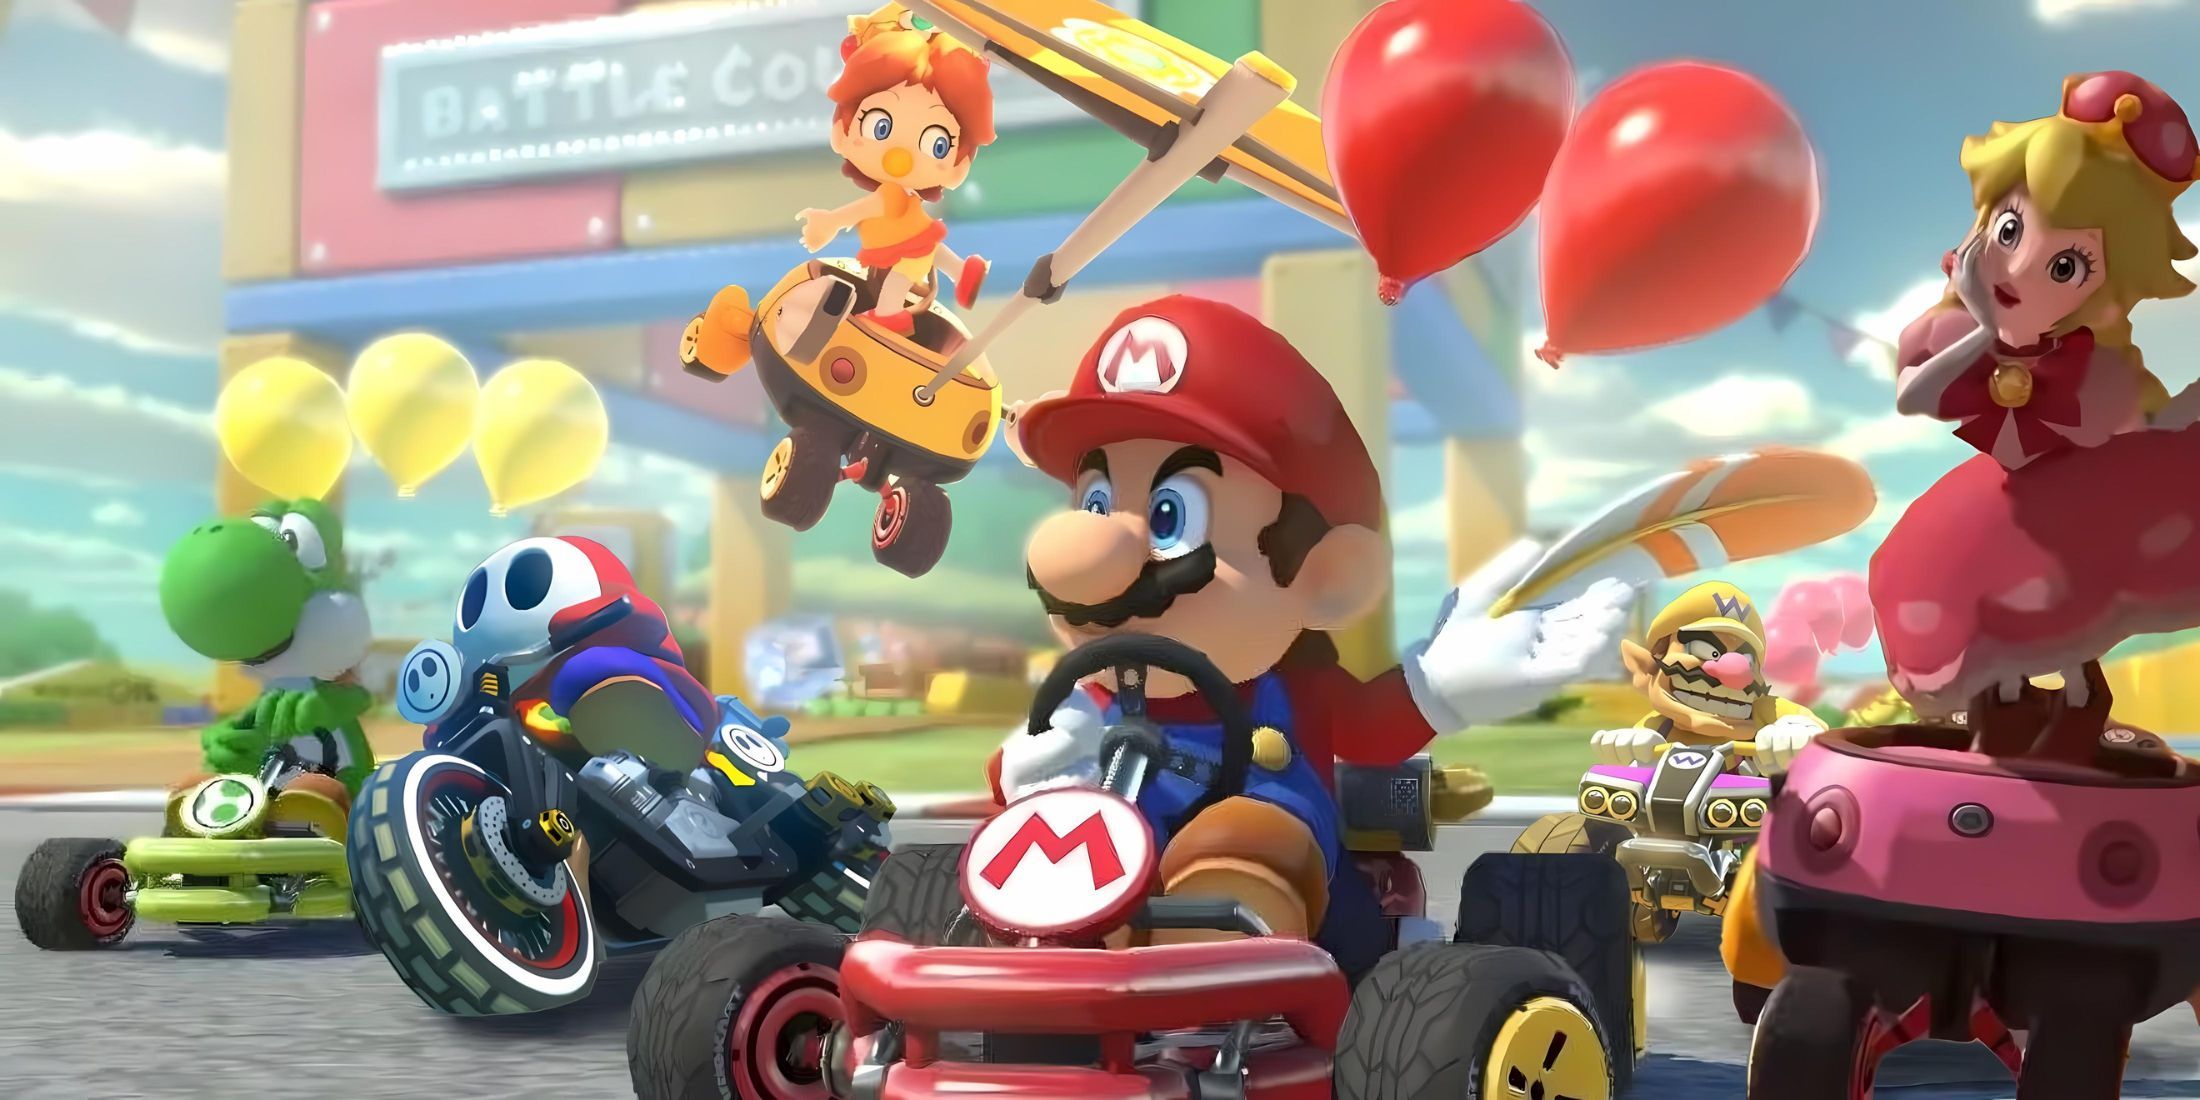 Mario Kart characters racing against each other